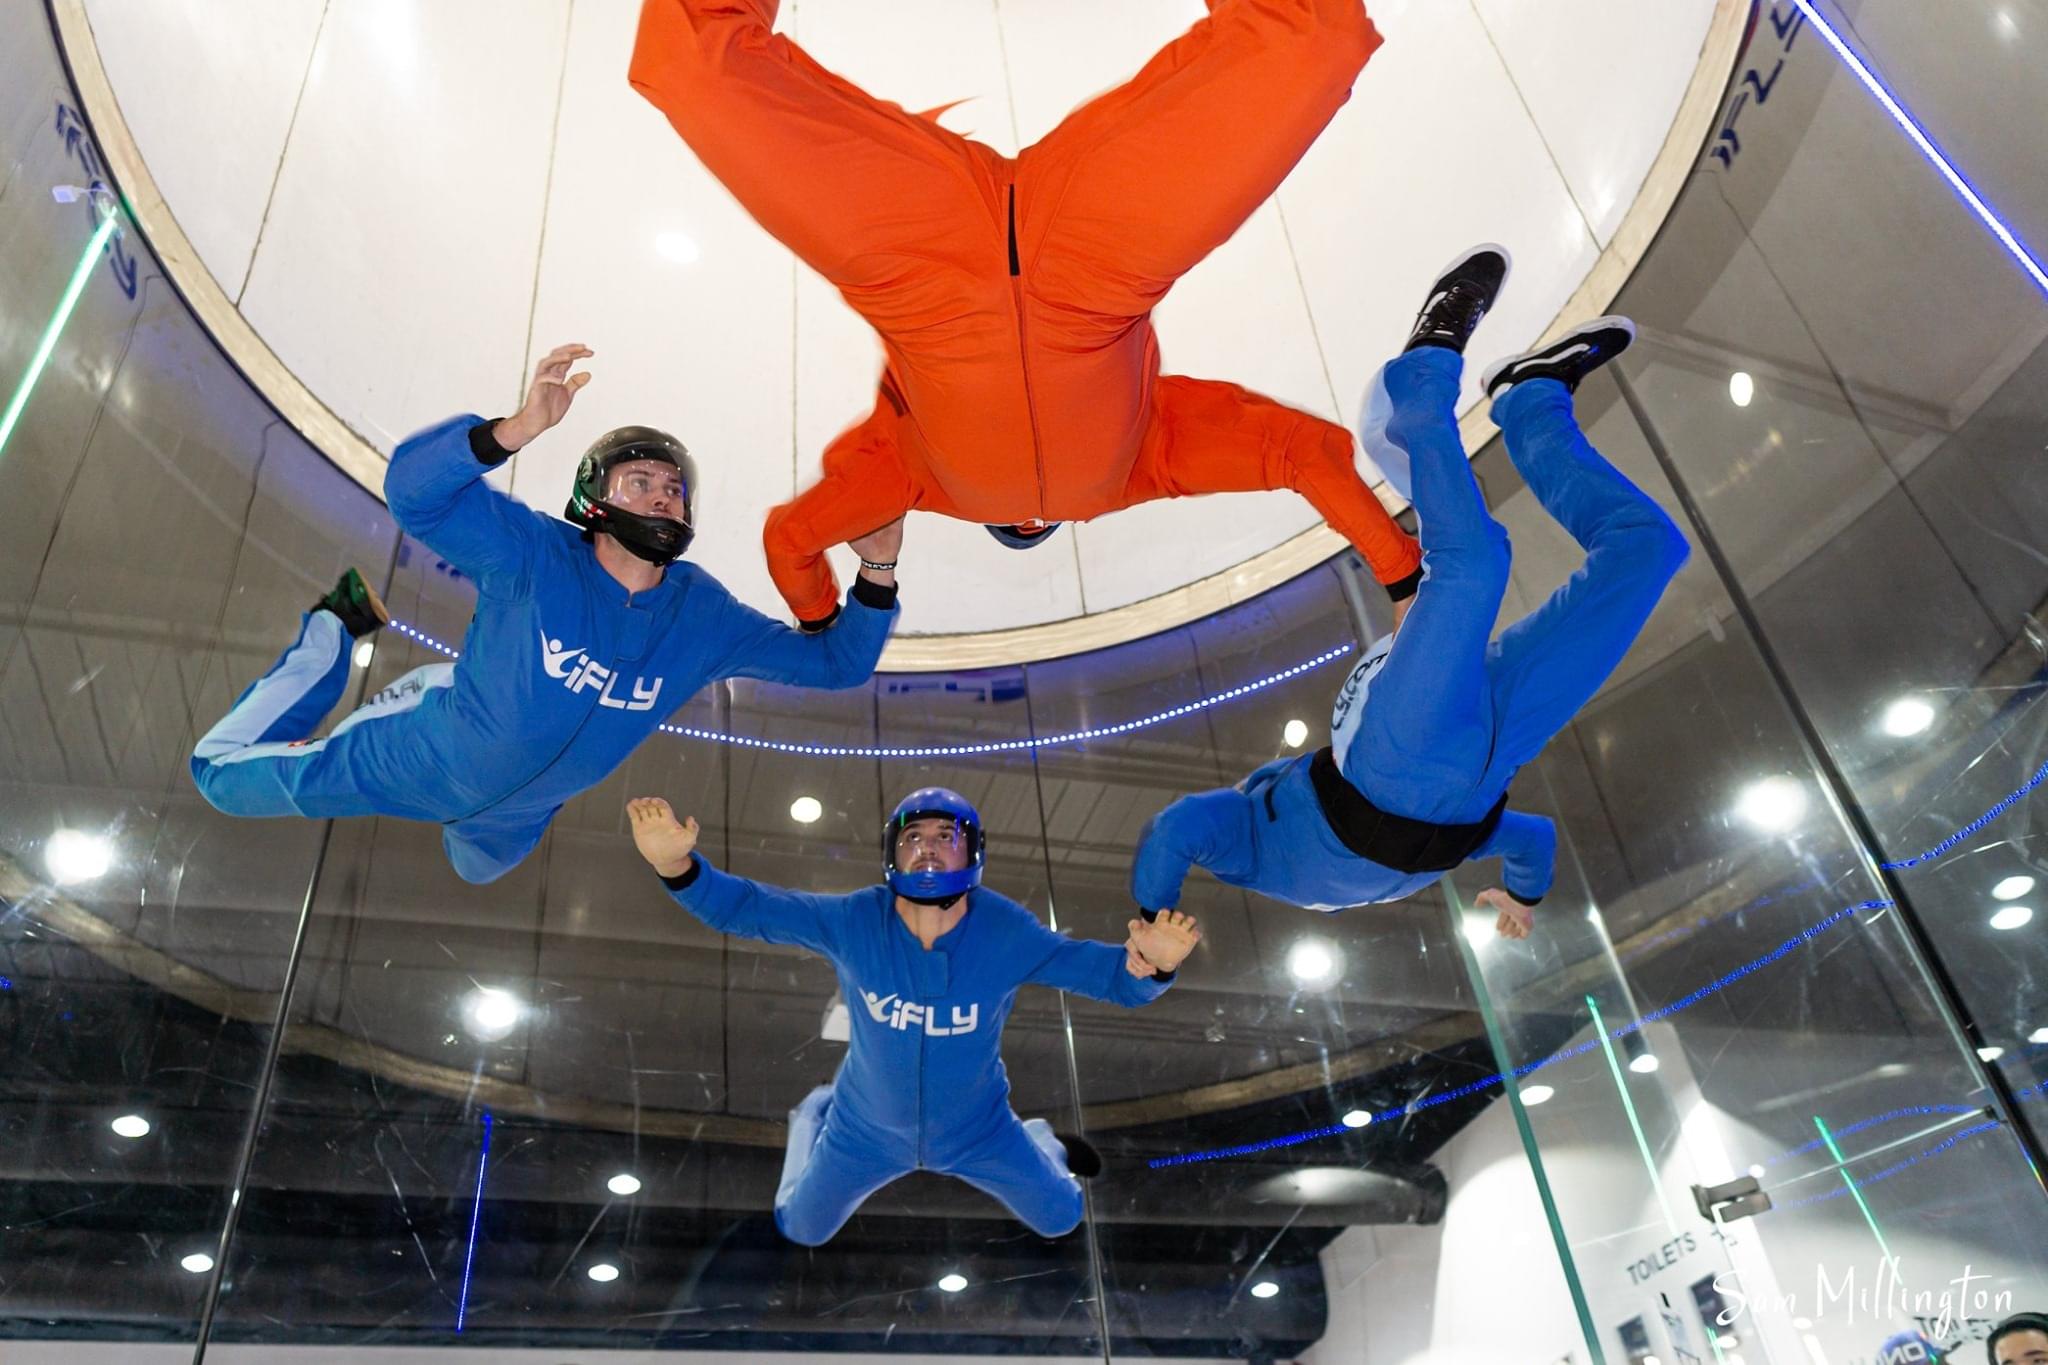 iFly Melbourne Overview